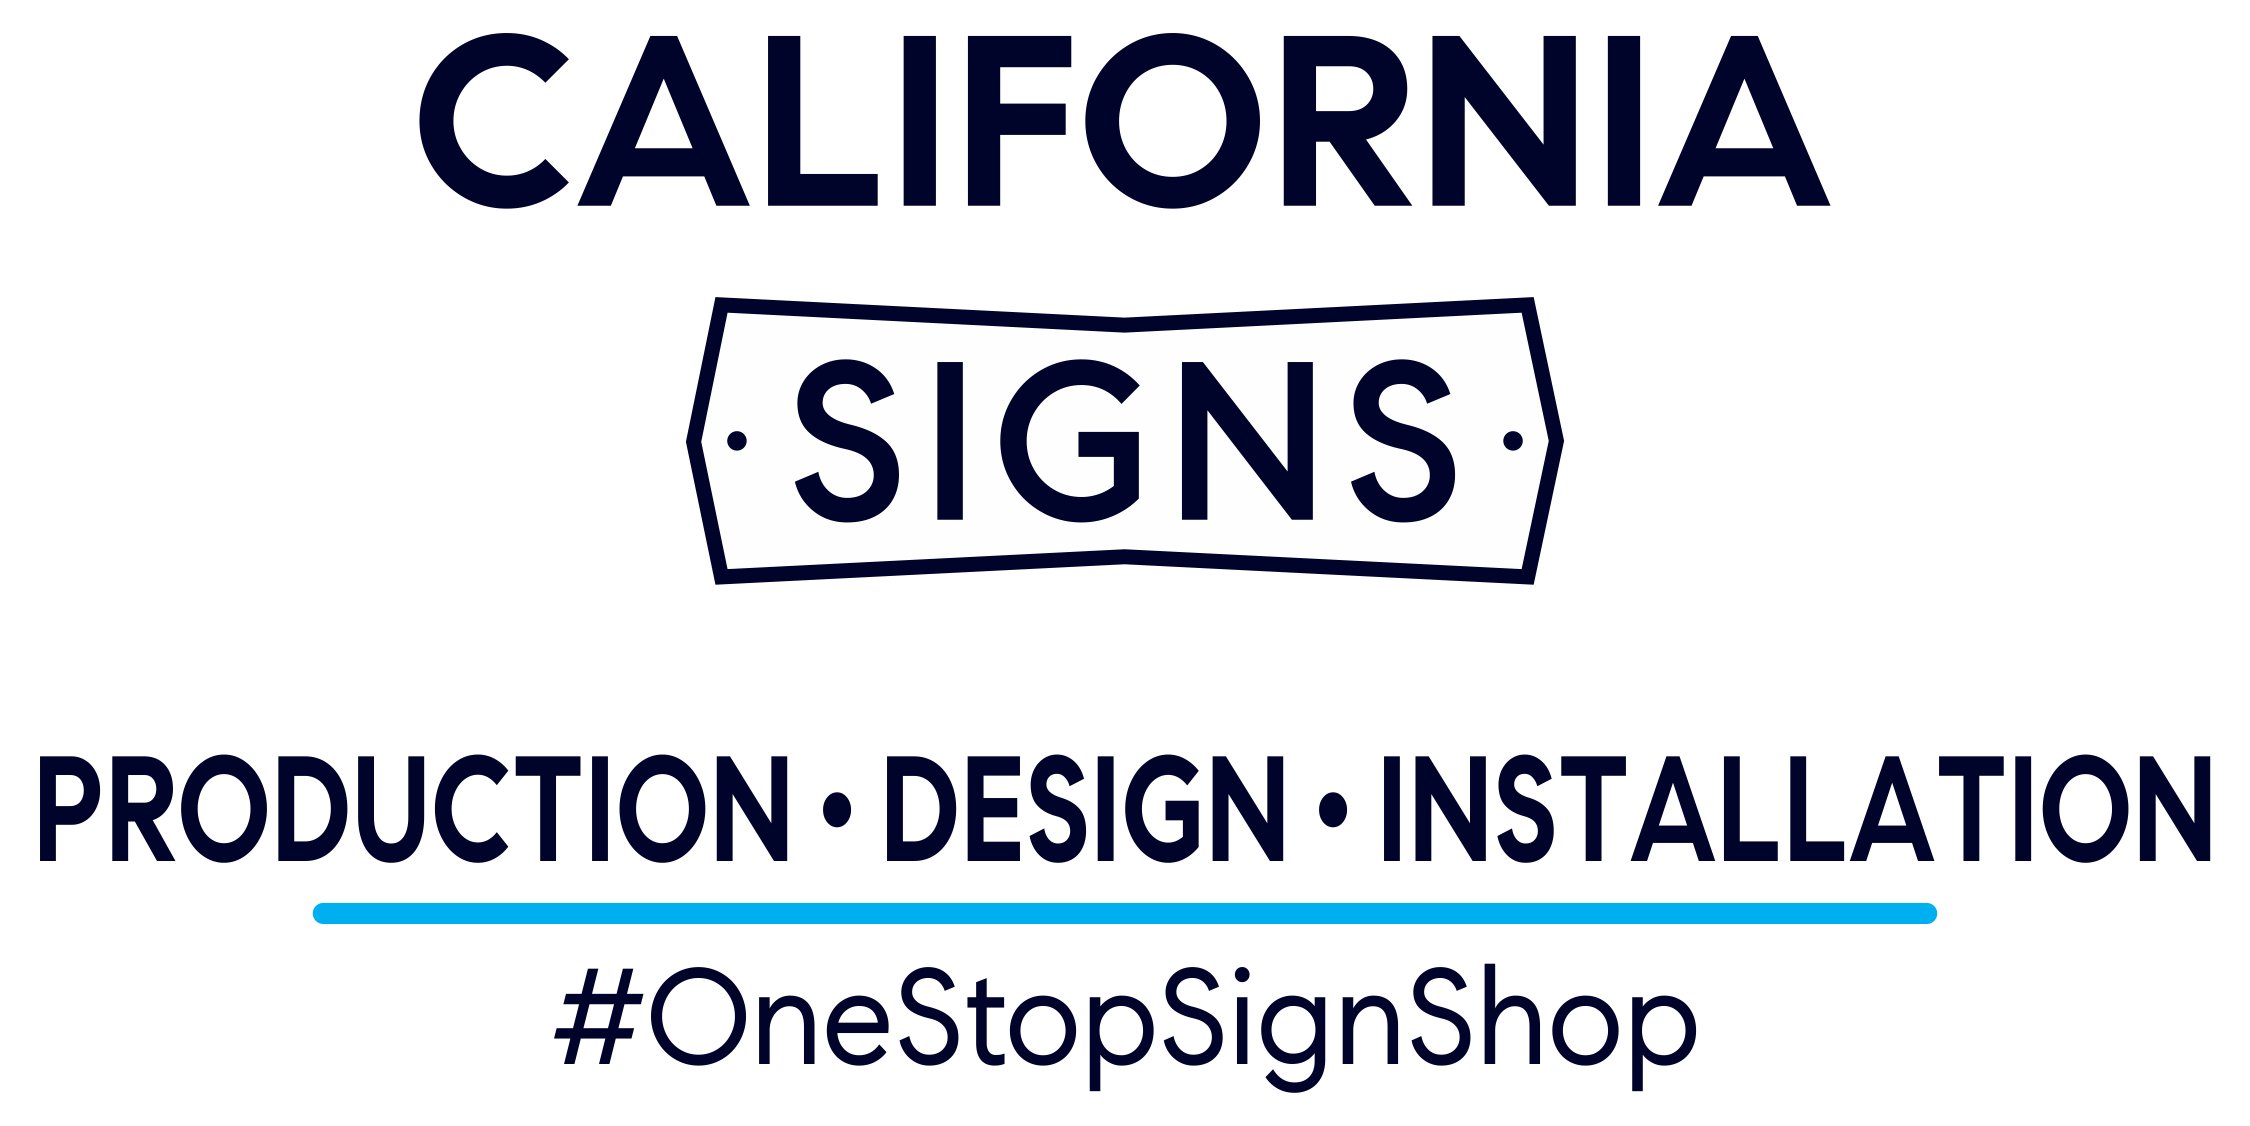 California Signs Logo with Services and hashtag One Stop Sign Shop